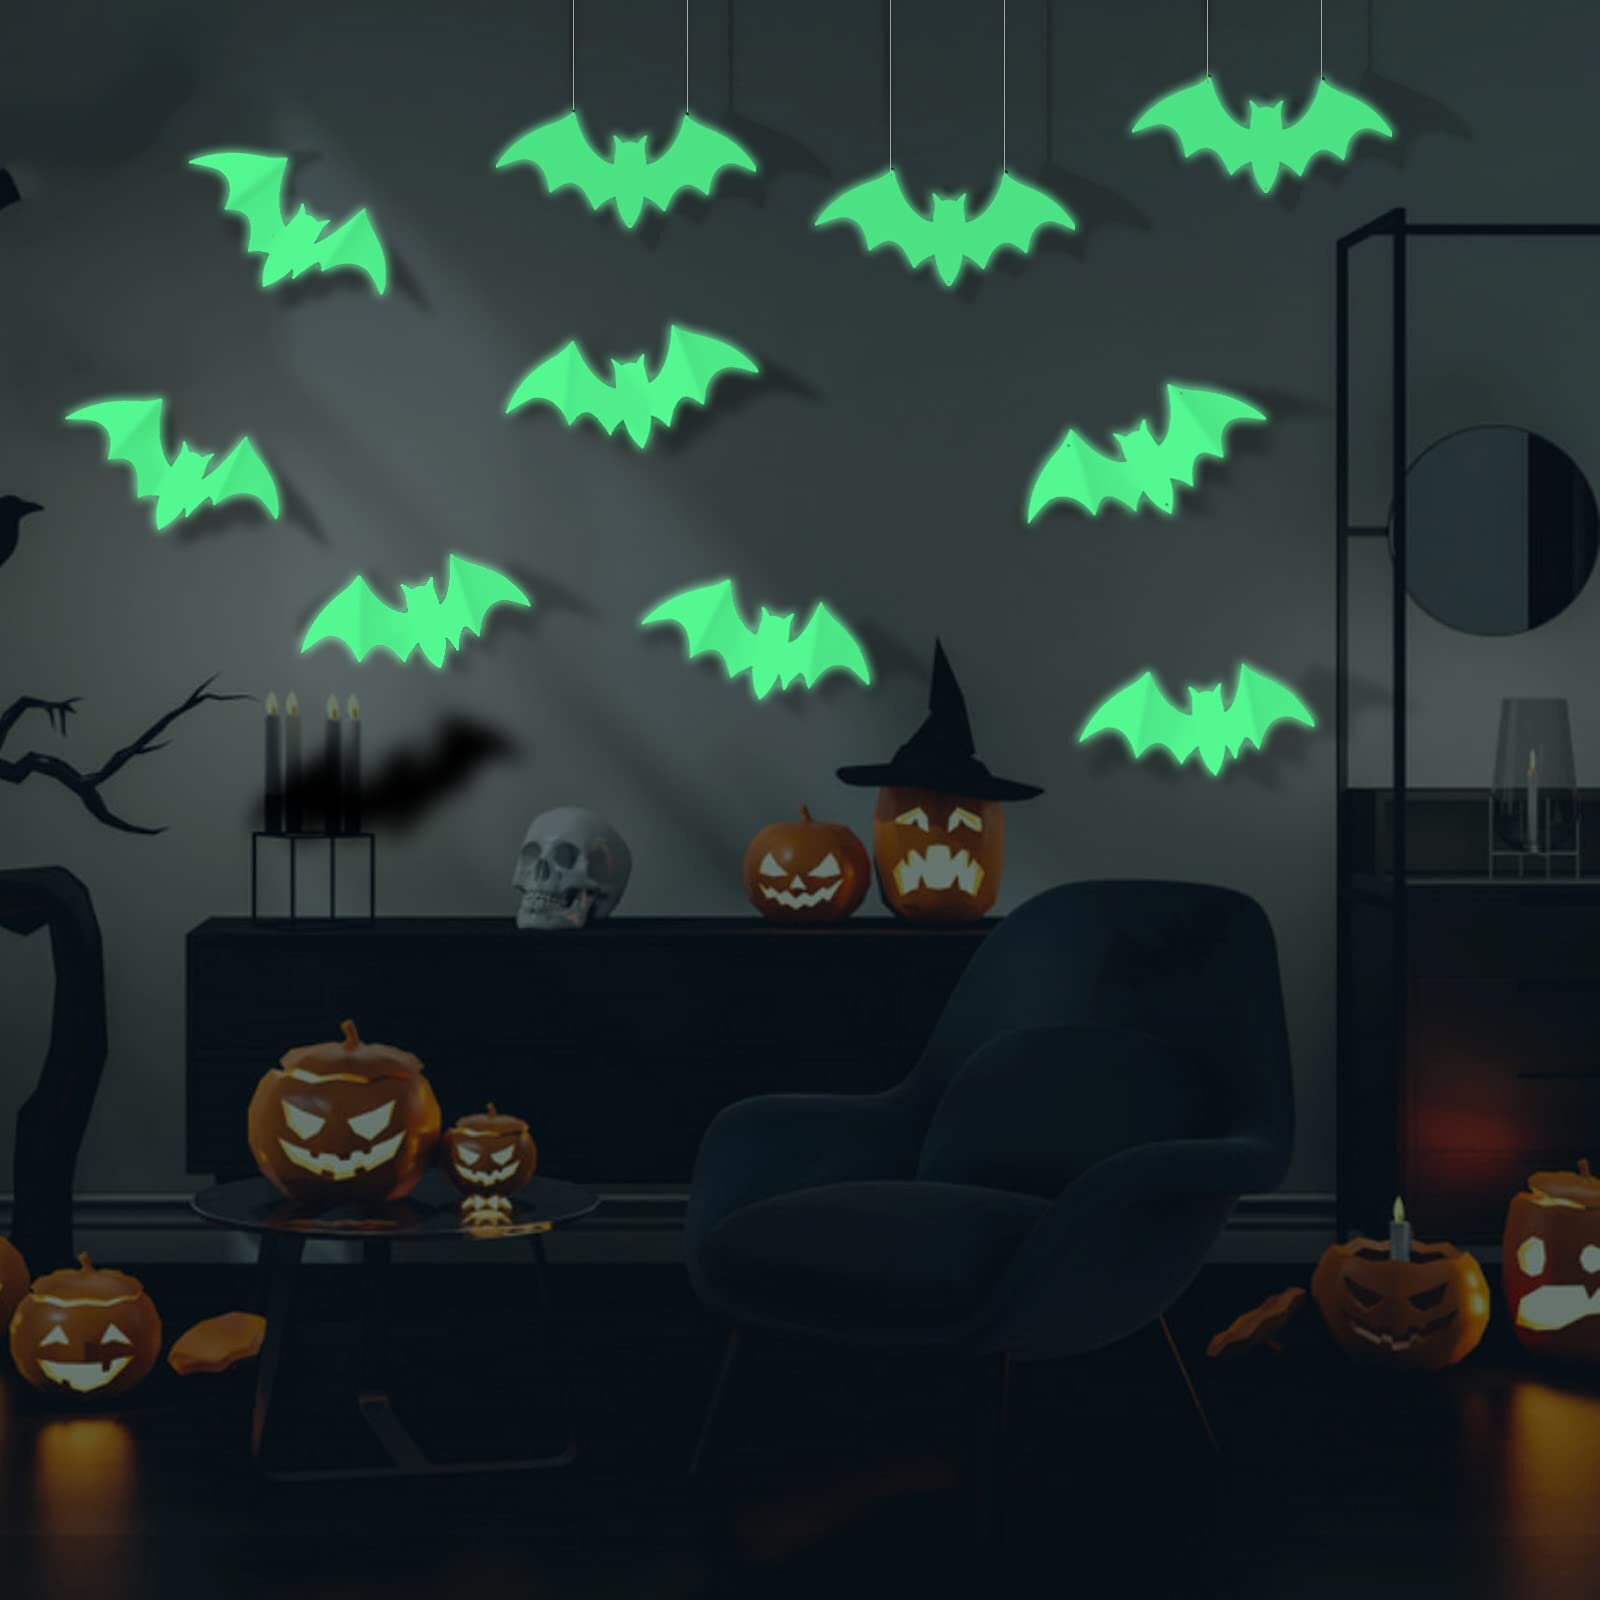 Black Bat YMidea 36pcs 3D Bats Stickers Halloween Decoration DIY Realistic Halloween Party Scary Removable Window Door Wall Decals for Festival Party Must-Have